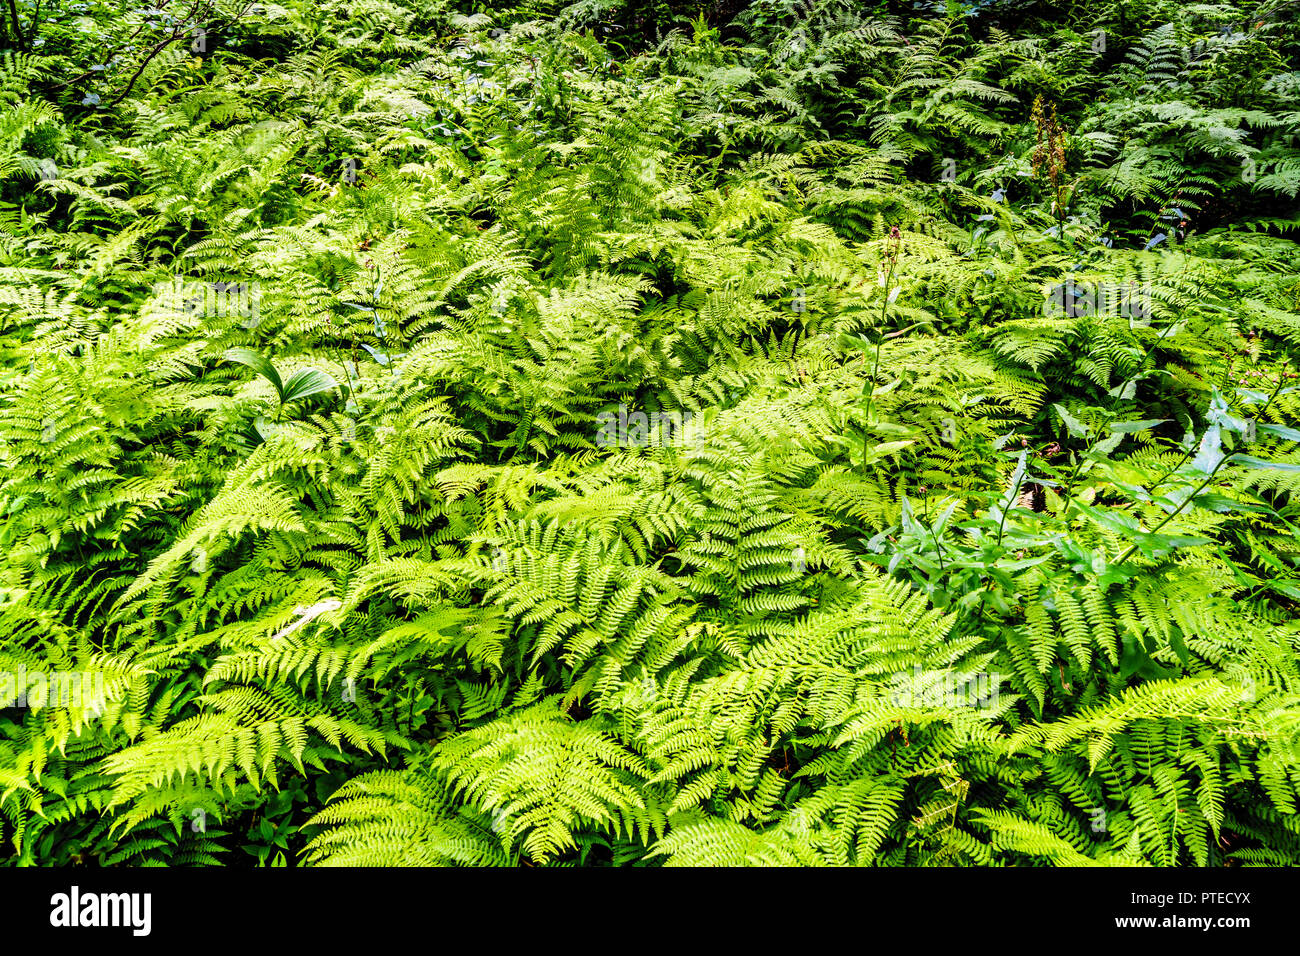 Large Group of Western Sword Ferns along a hiking trail to Falls Lake near the Coquihalla Summit in British Columbia, Canada Stock Photo